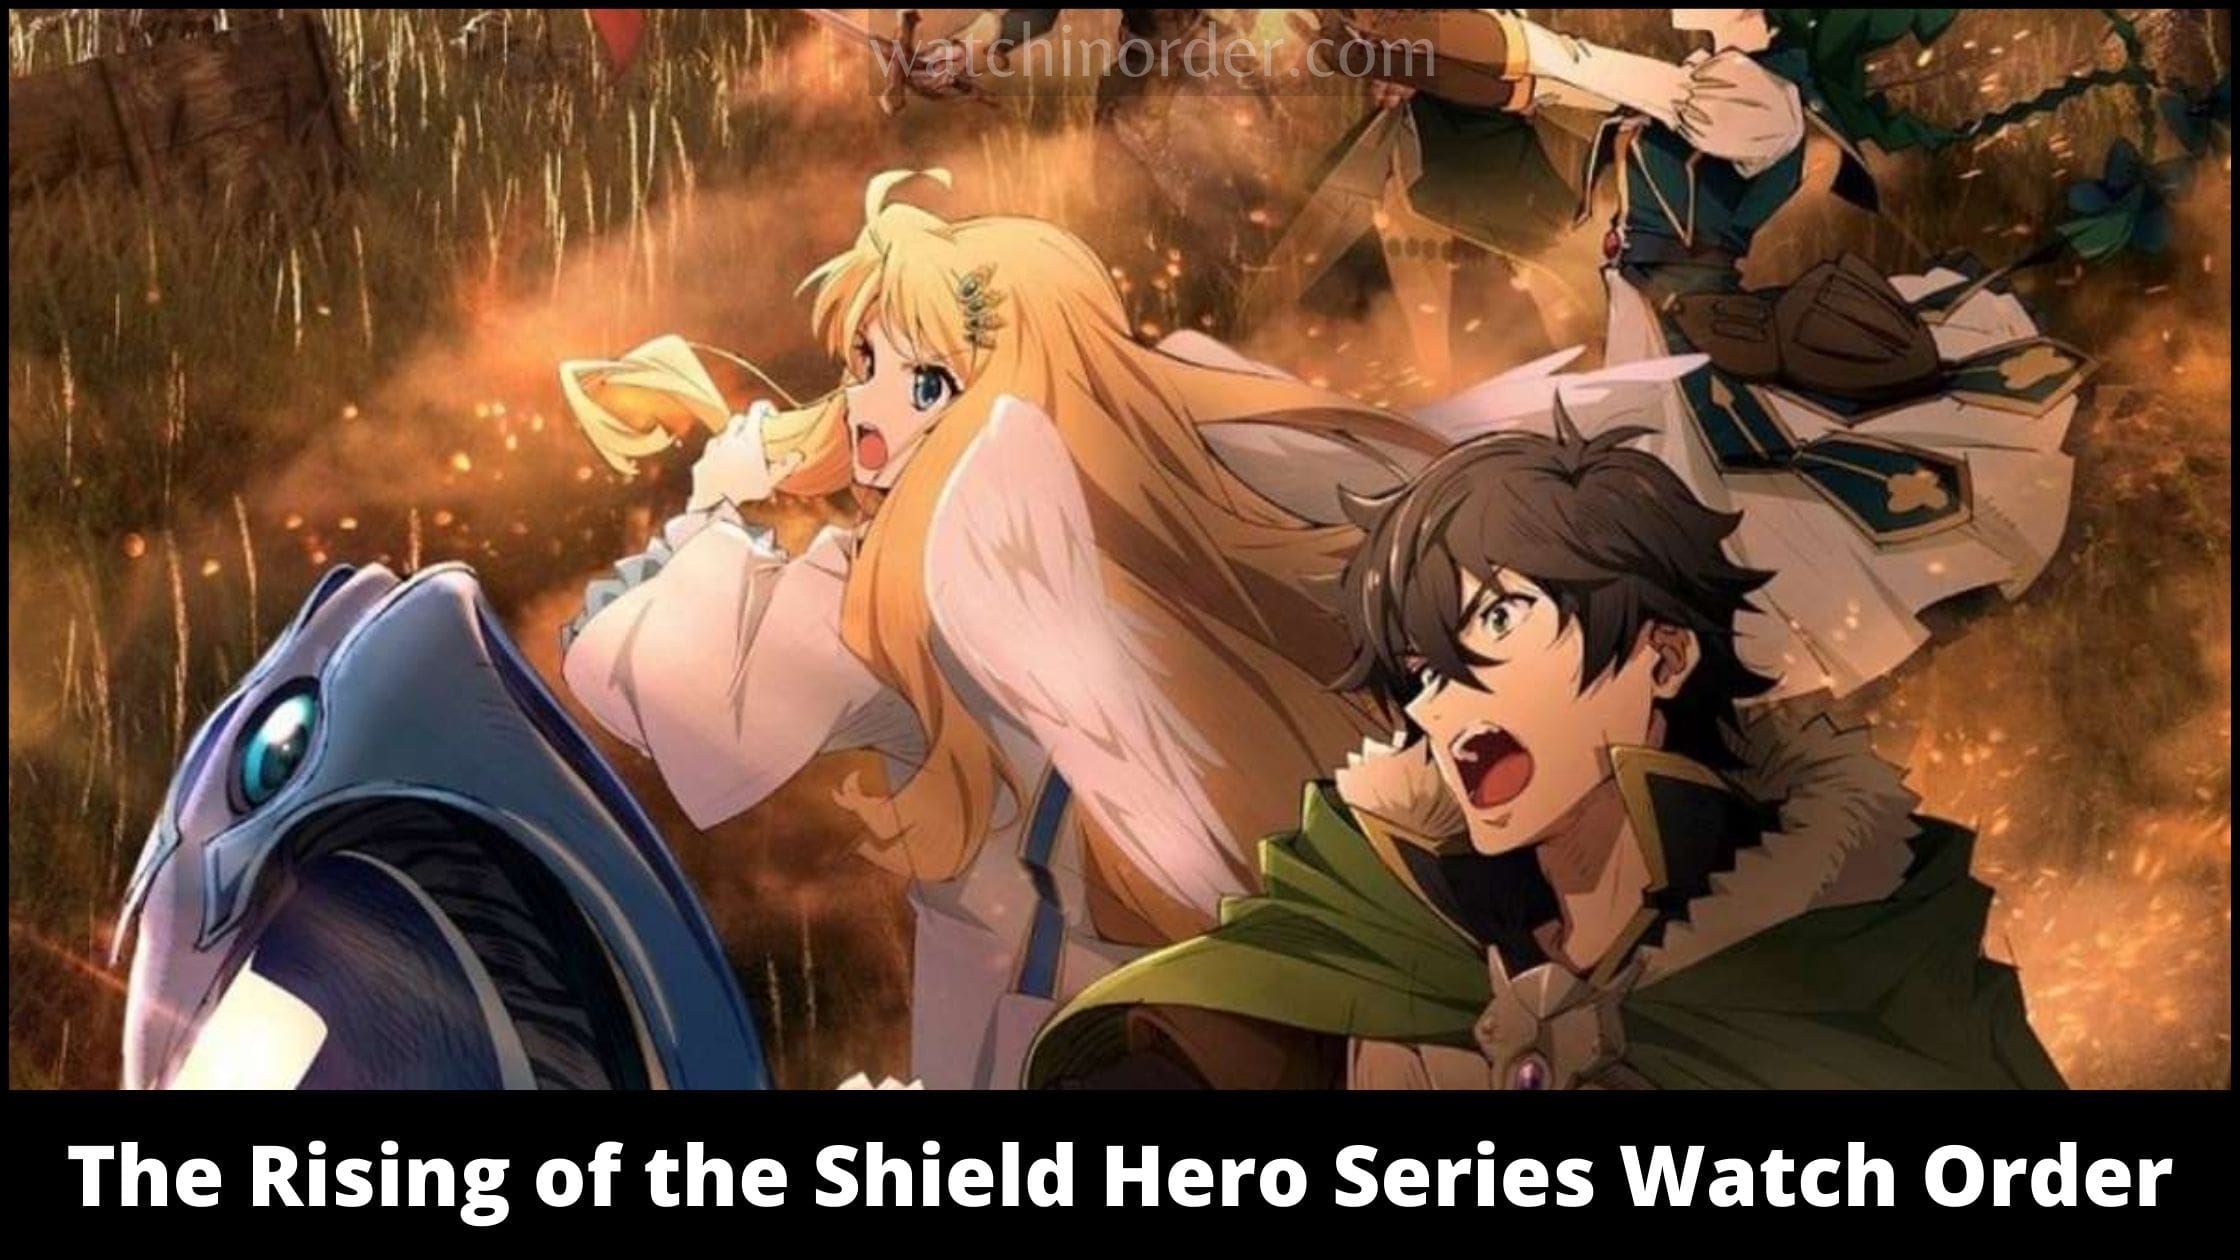 The Rising of the Shield Hero Series Watch Order